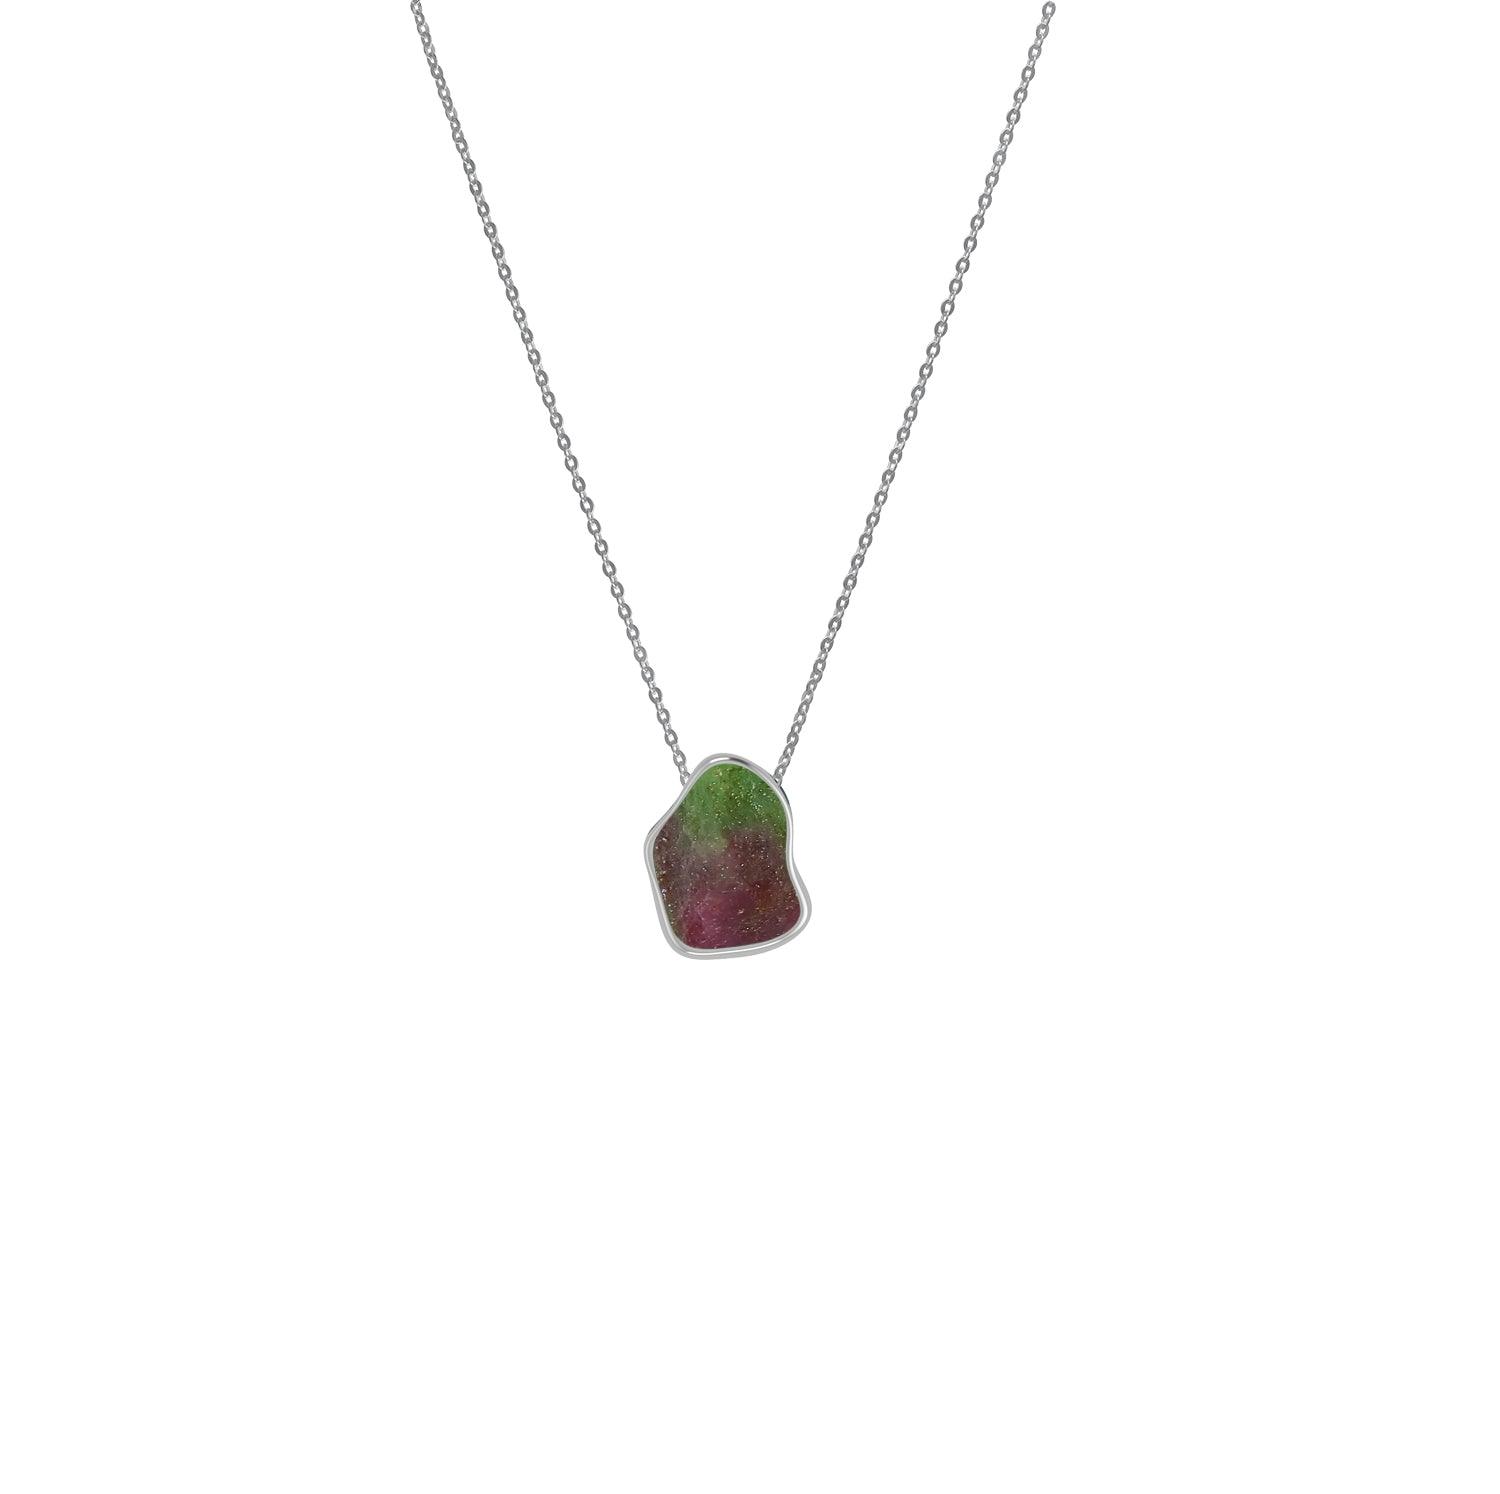 925 Sterling Silver Rough Ruby Zoisite Slider Necklace With Chain 18" Bezel Set Jewelry Pack of 6